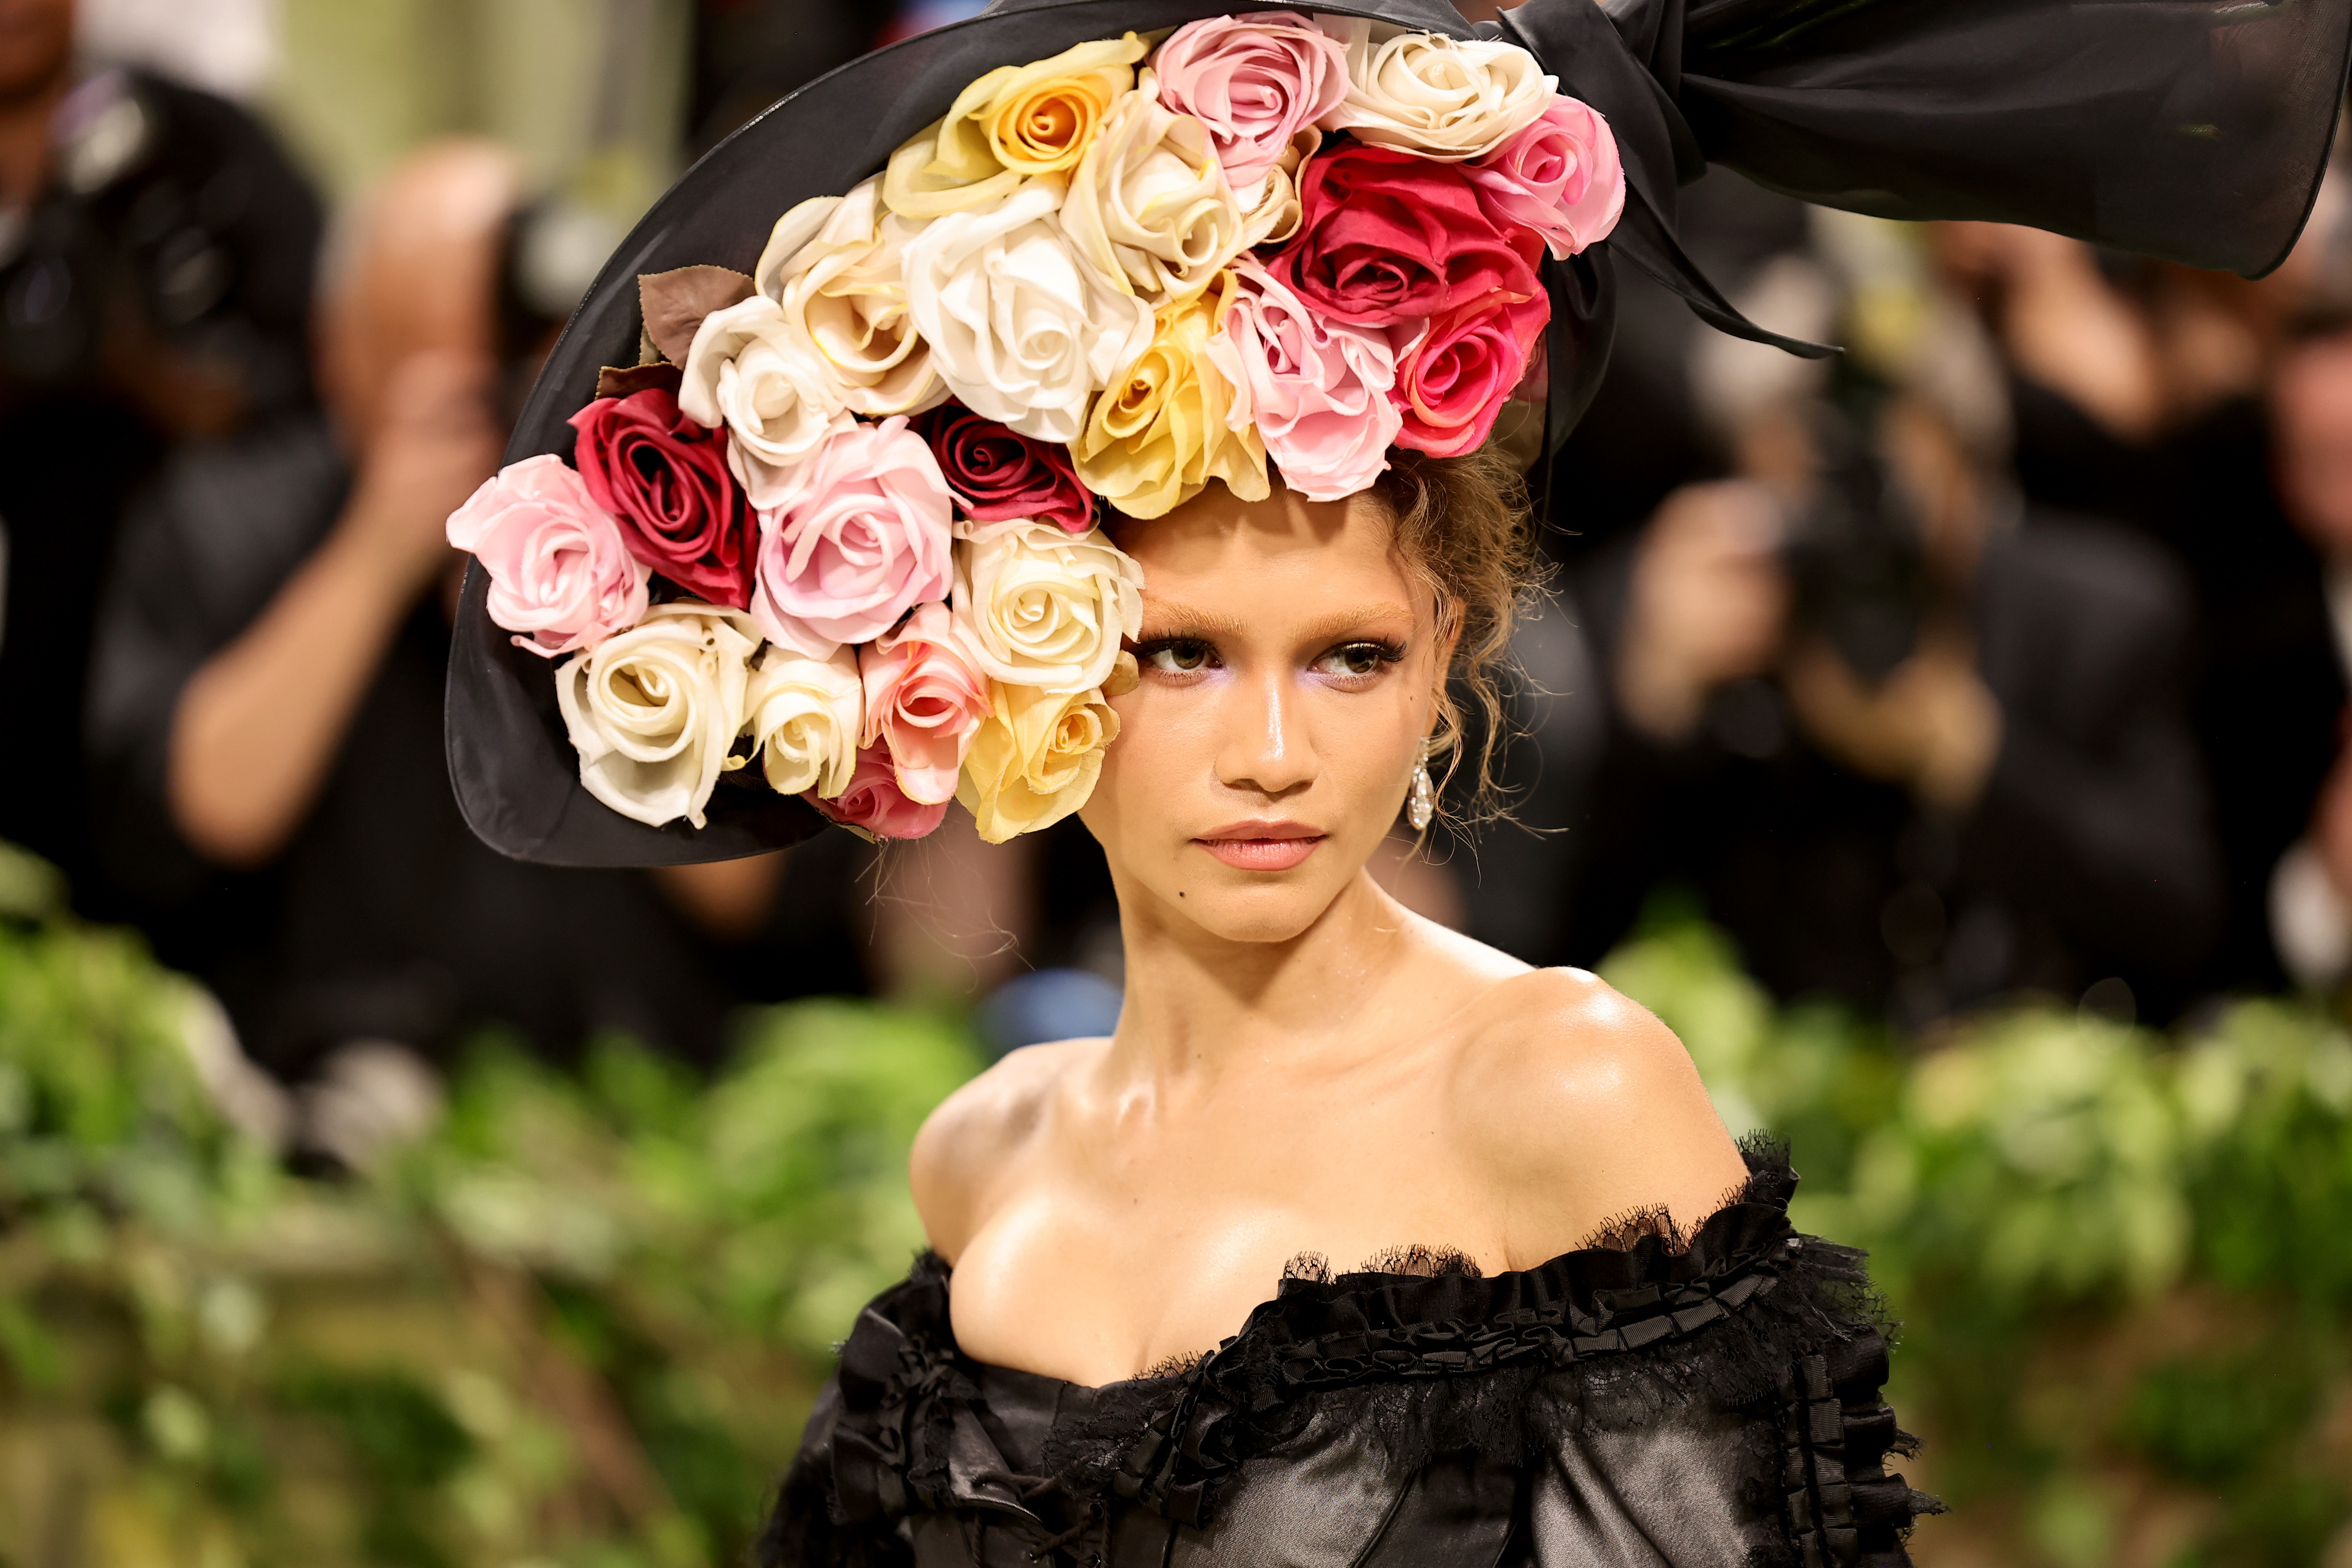 Model on the runway wearing an elaborate floral headpiece and a ruffled black off-the-shoulder gown